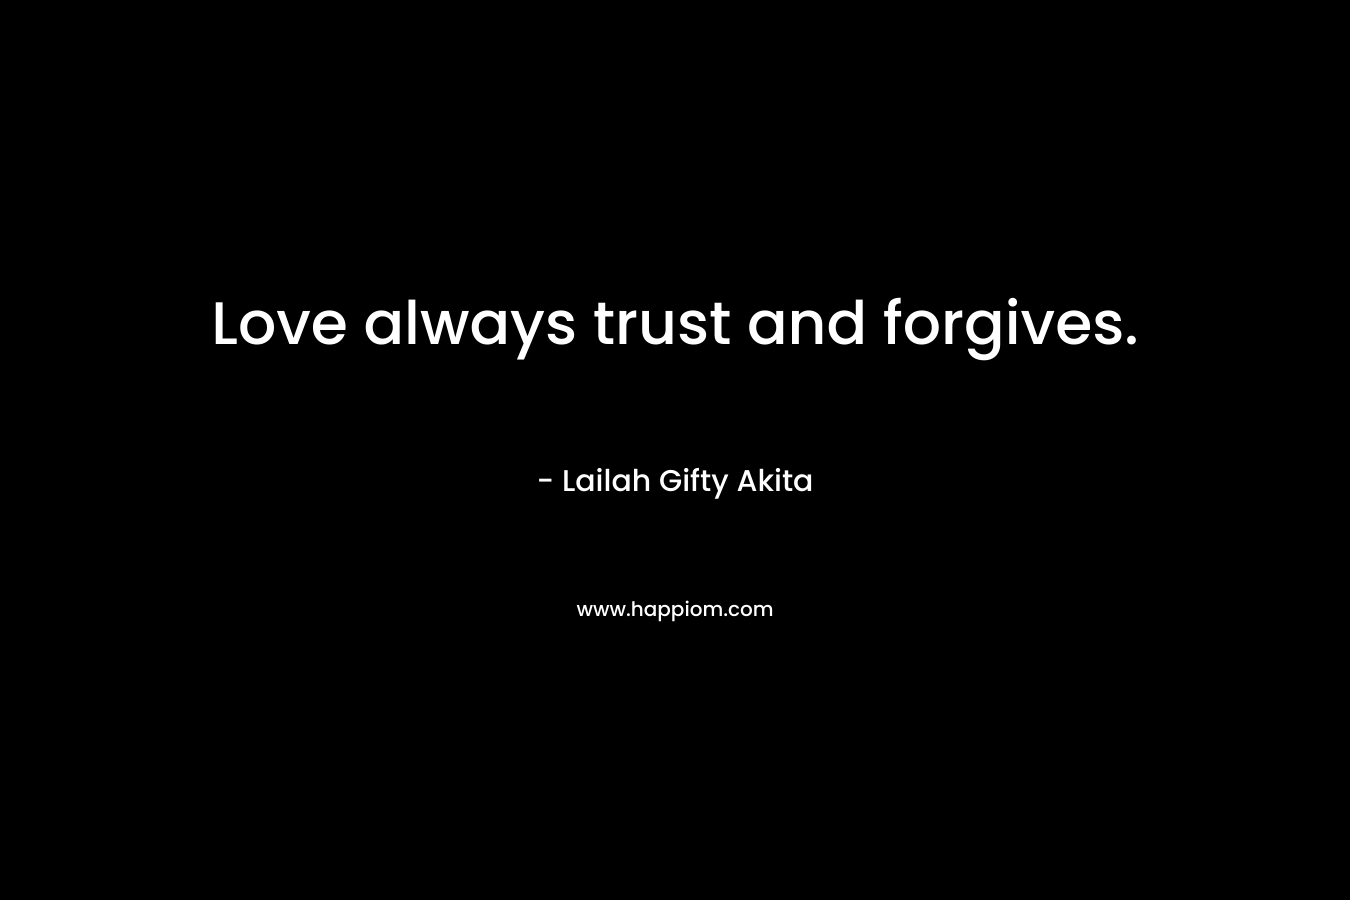 Love always trust and forgives.